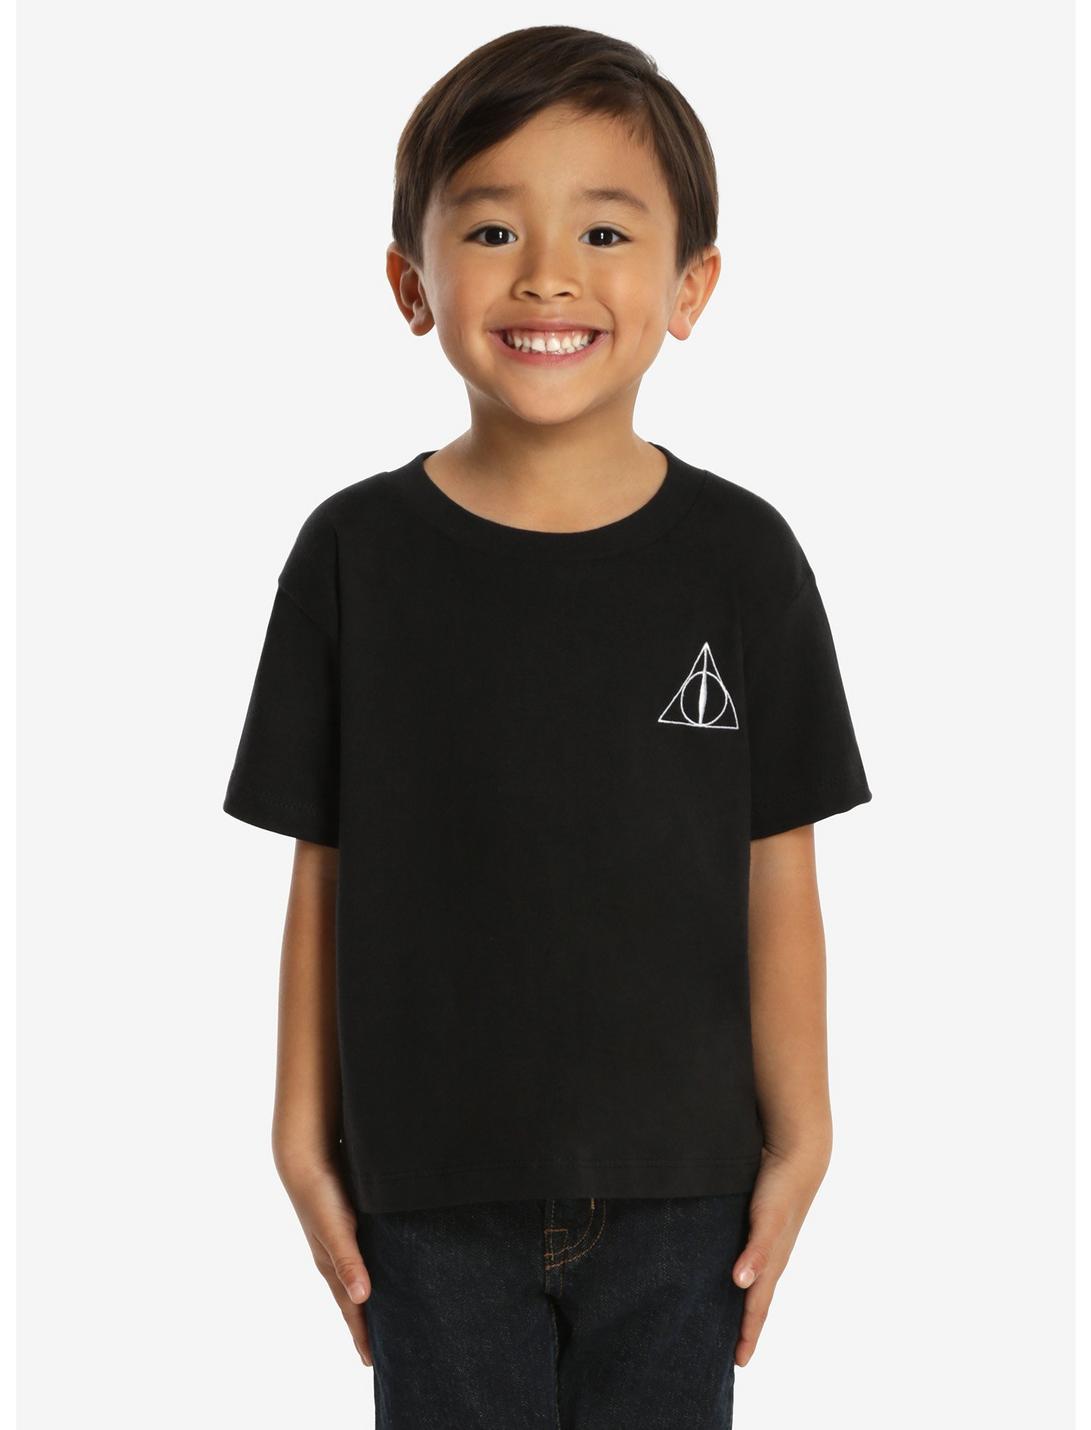 Harry Potter Deathly Hallows Embroidered Toddler Tee, BLACK, hi-res